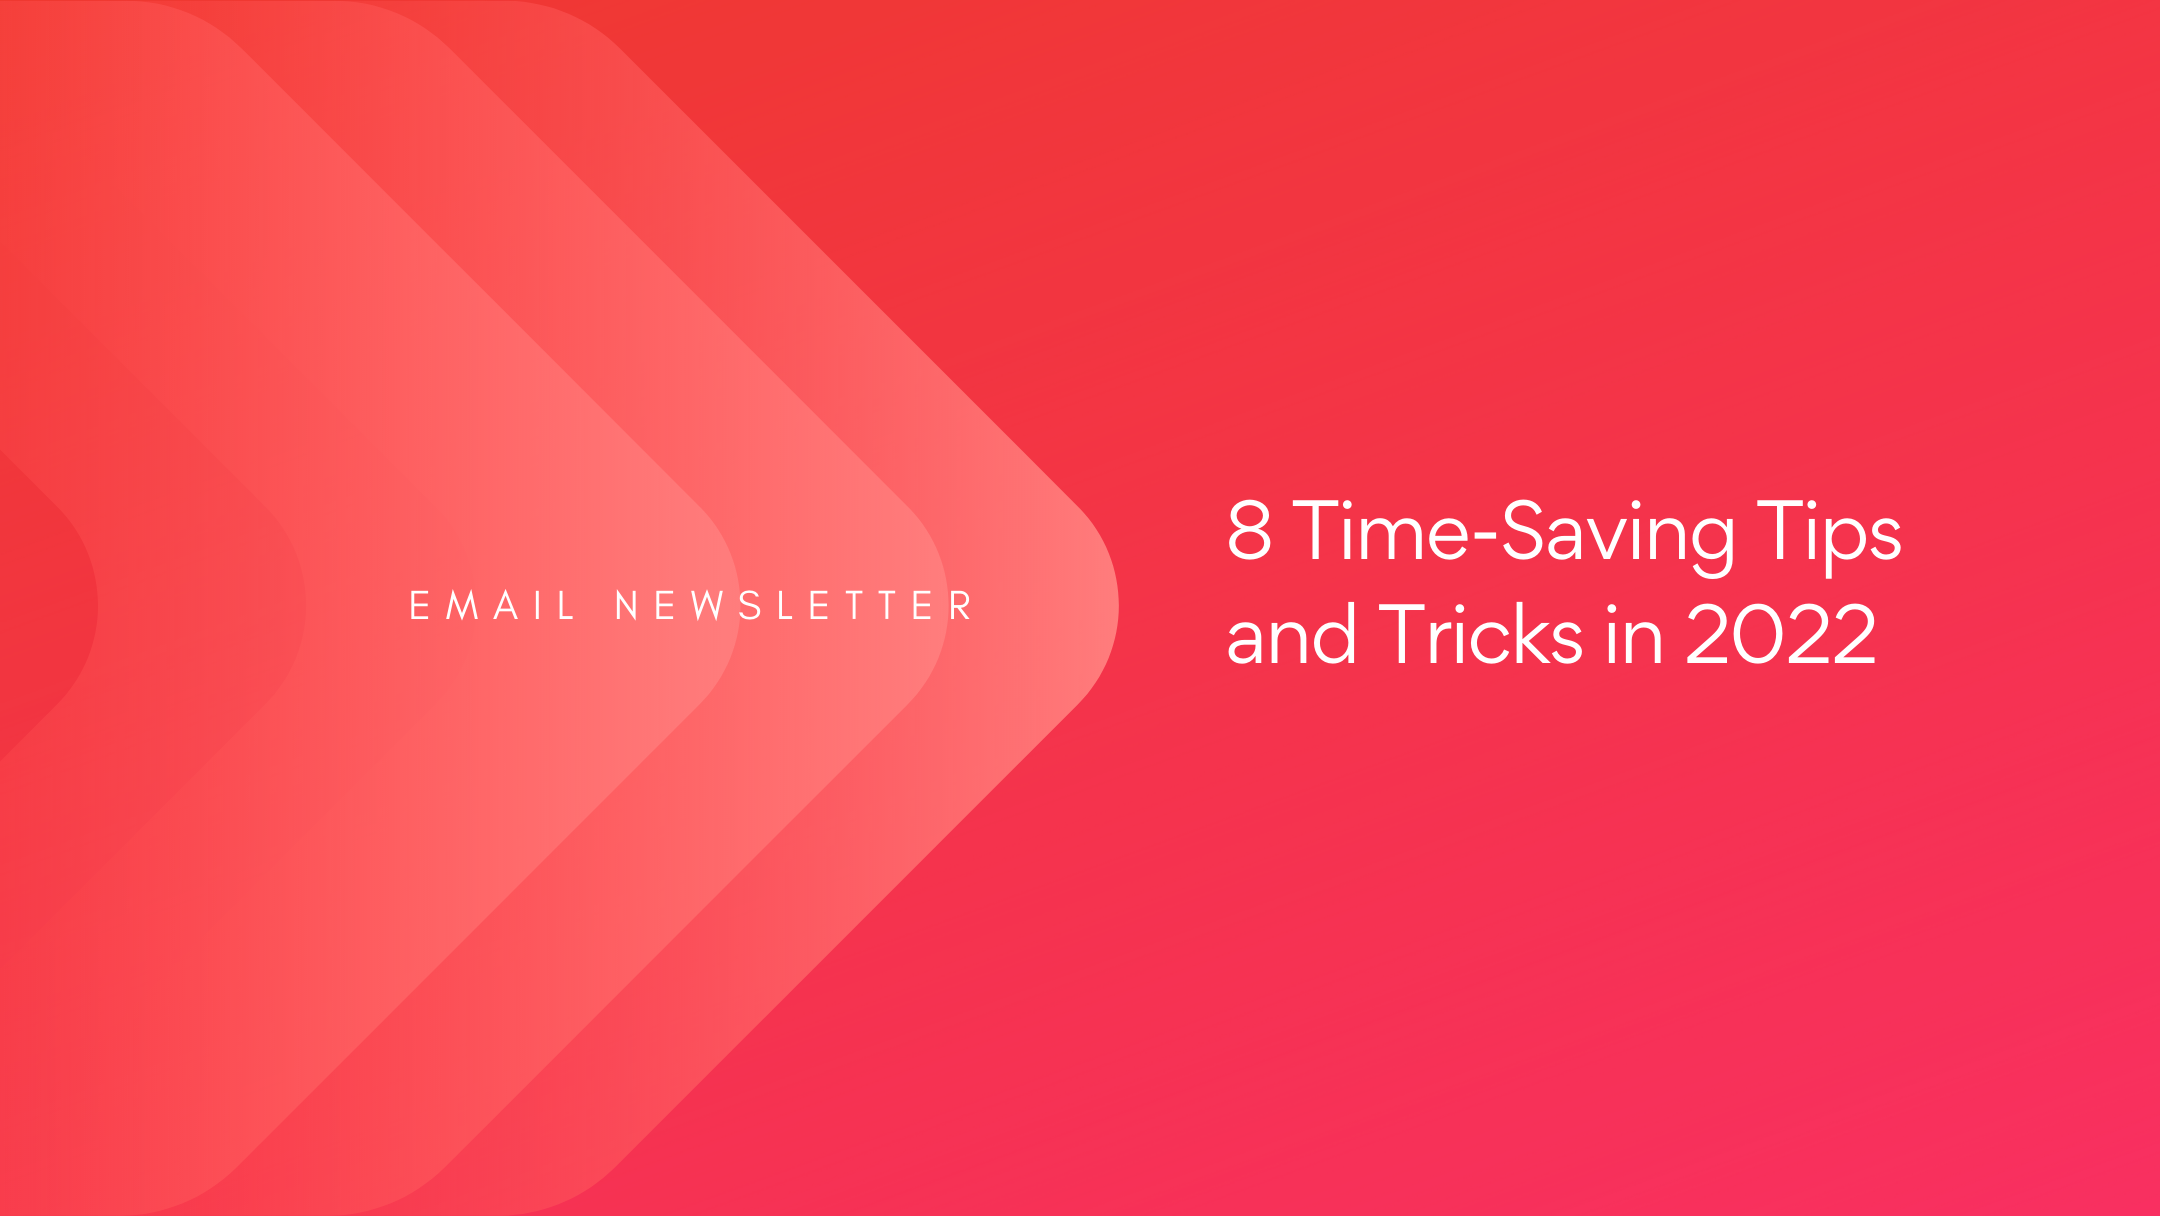 AgencyVista_8-time-saving-email-newsletter-tips-and-tricks-in-2022